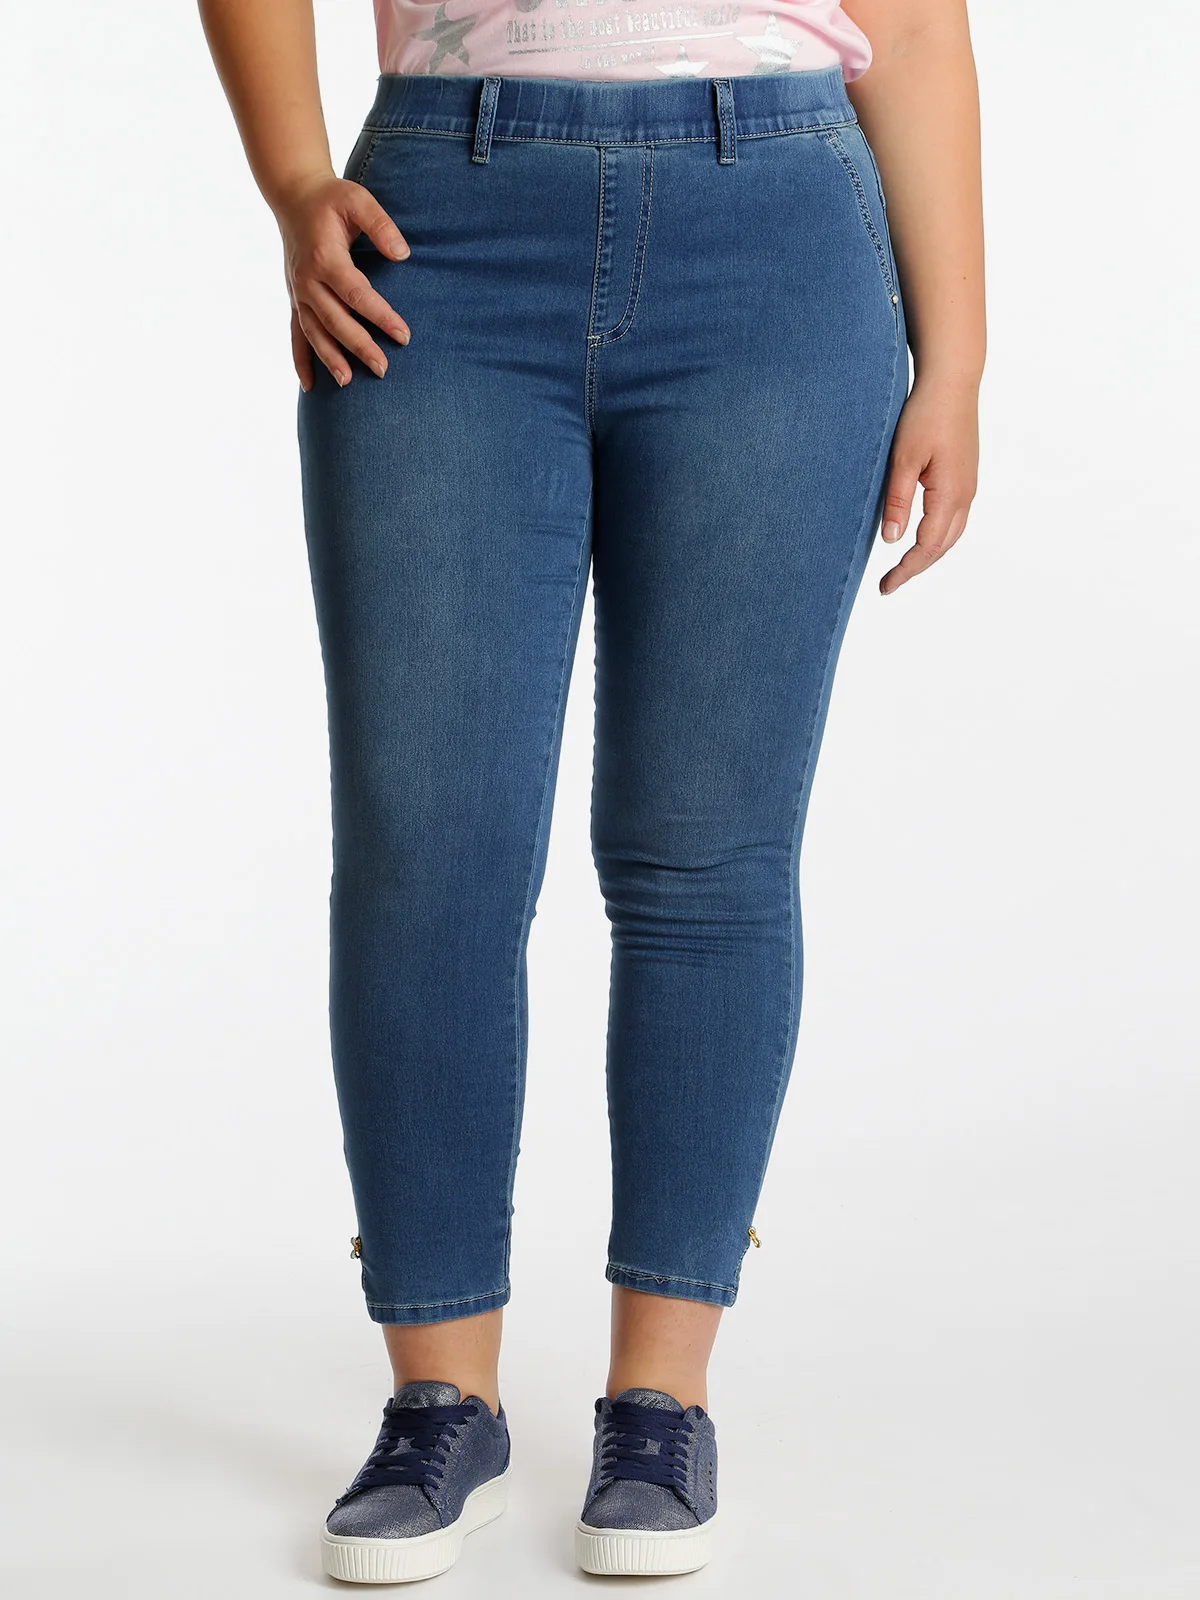 Jeggings stretch-in Jeans from Women's Clothing on Aliexpress.com ...